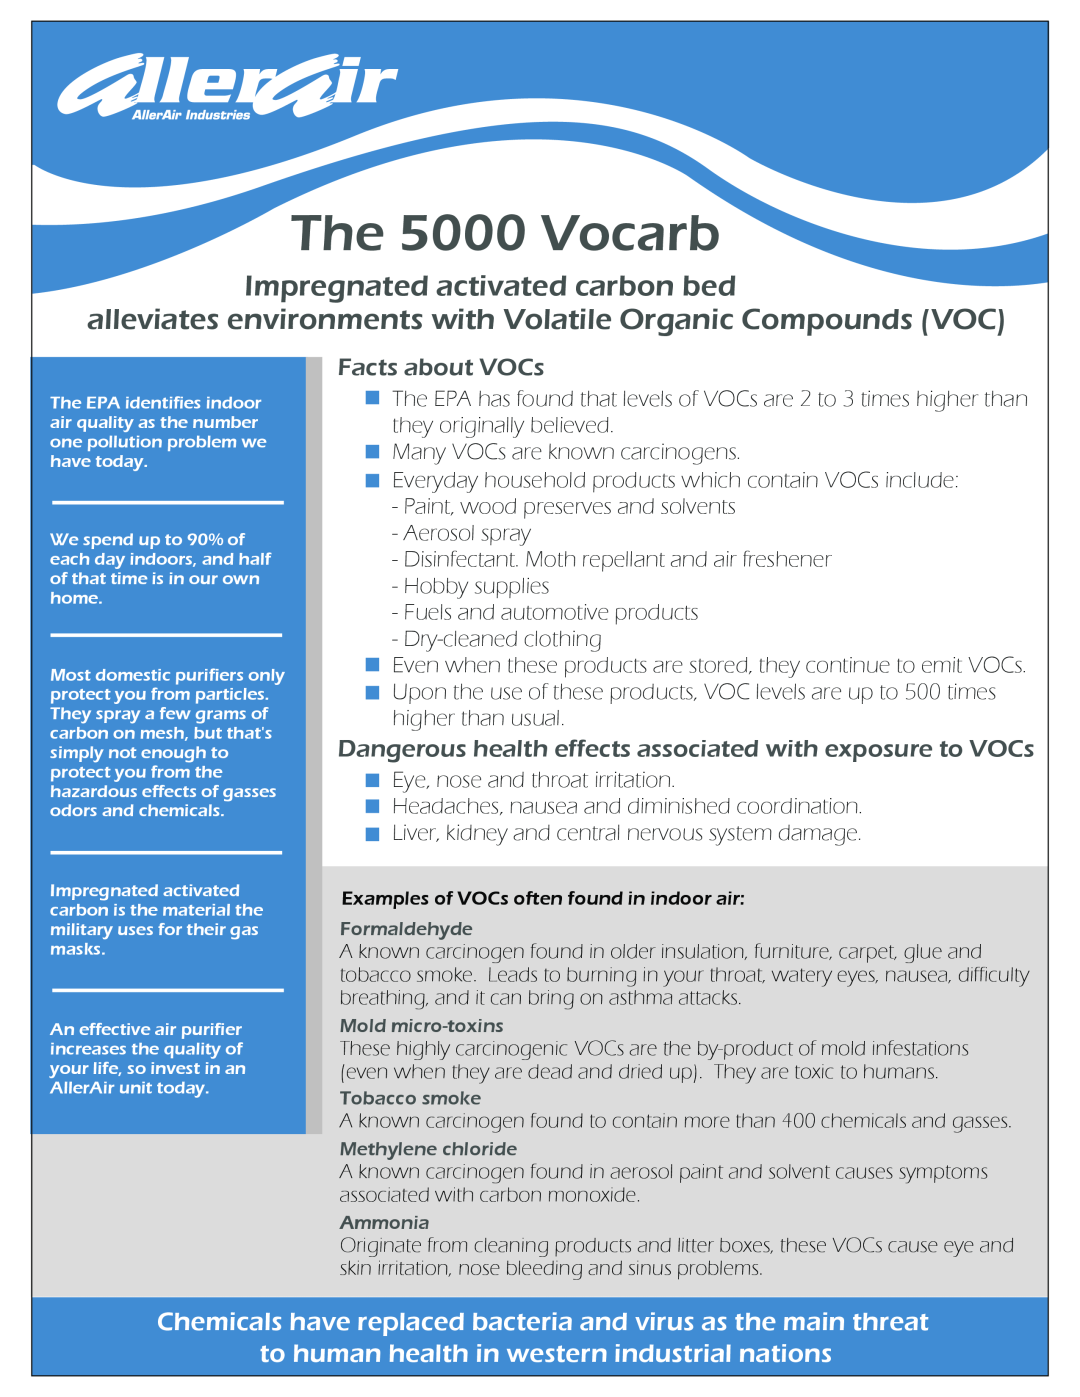 AllerAir manual Facts about VOCs, The 5000 Vocarb, Impregnated activated carbon bed 